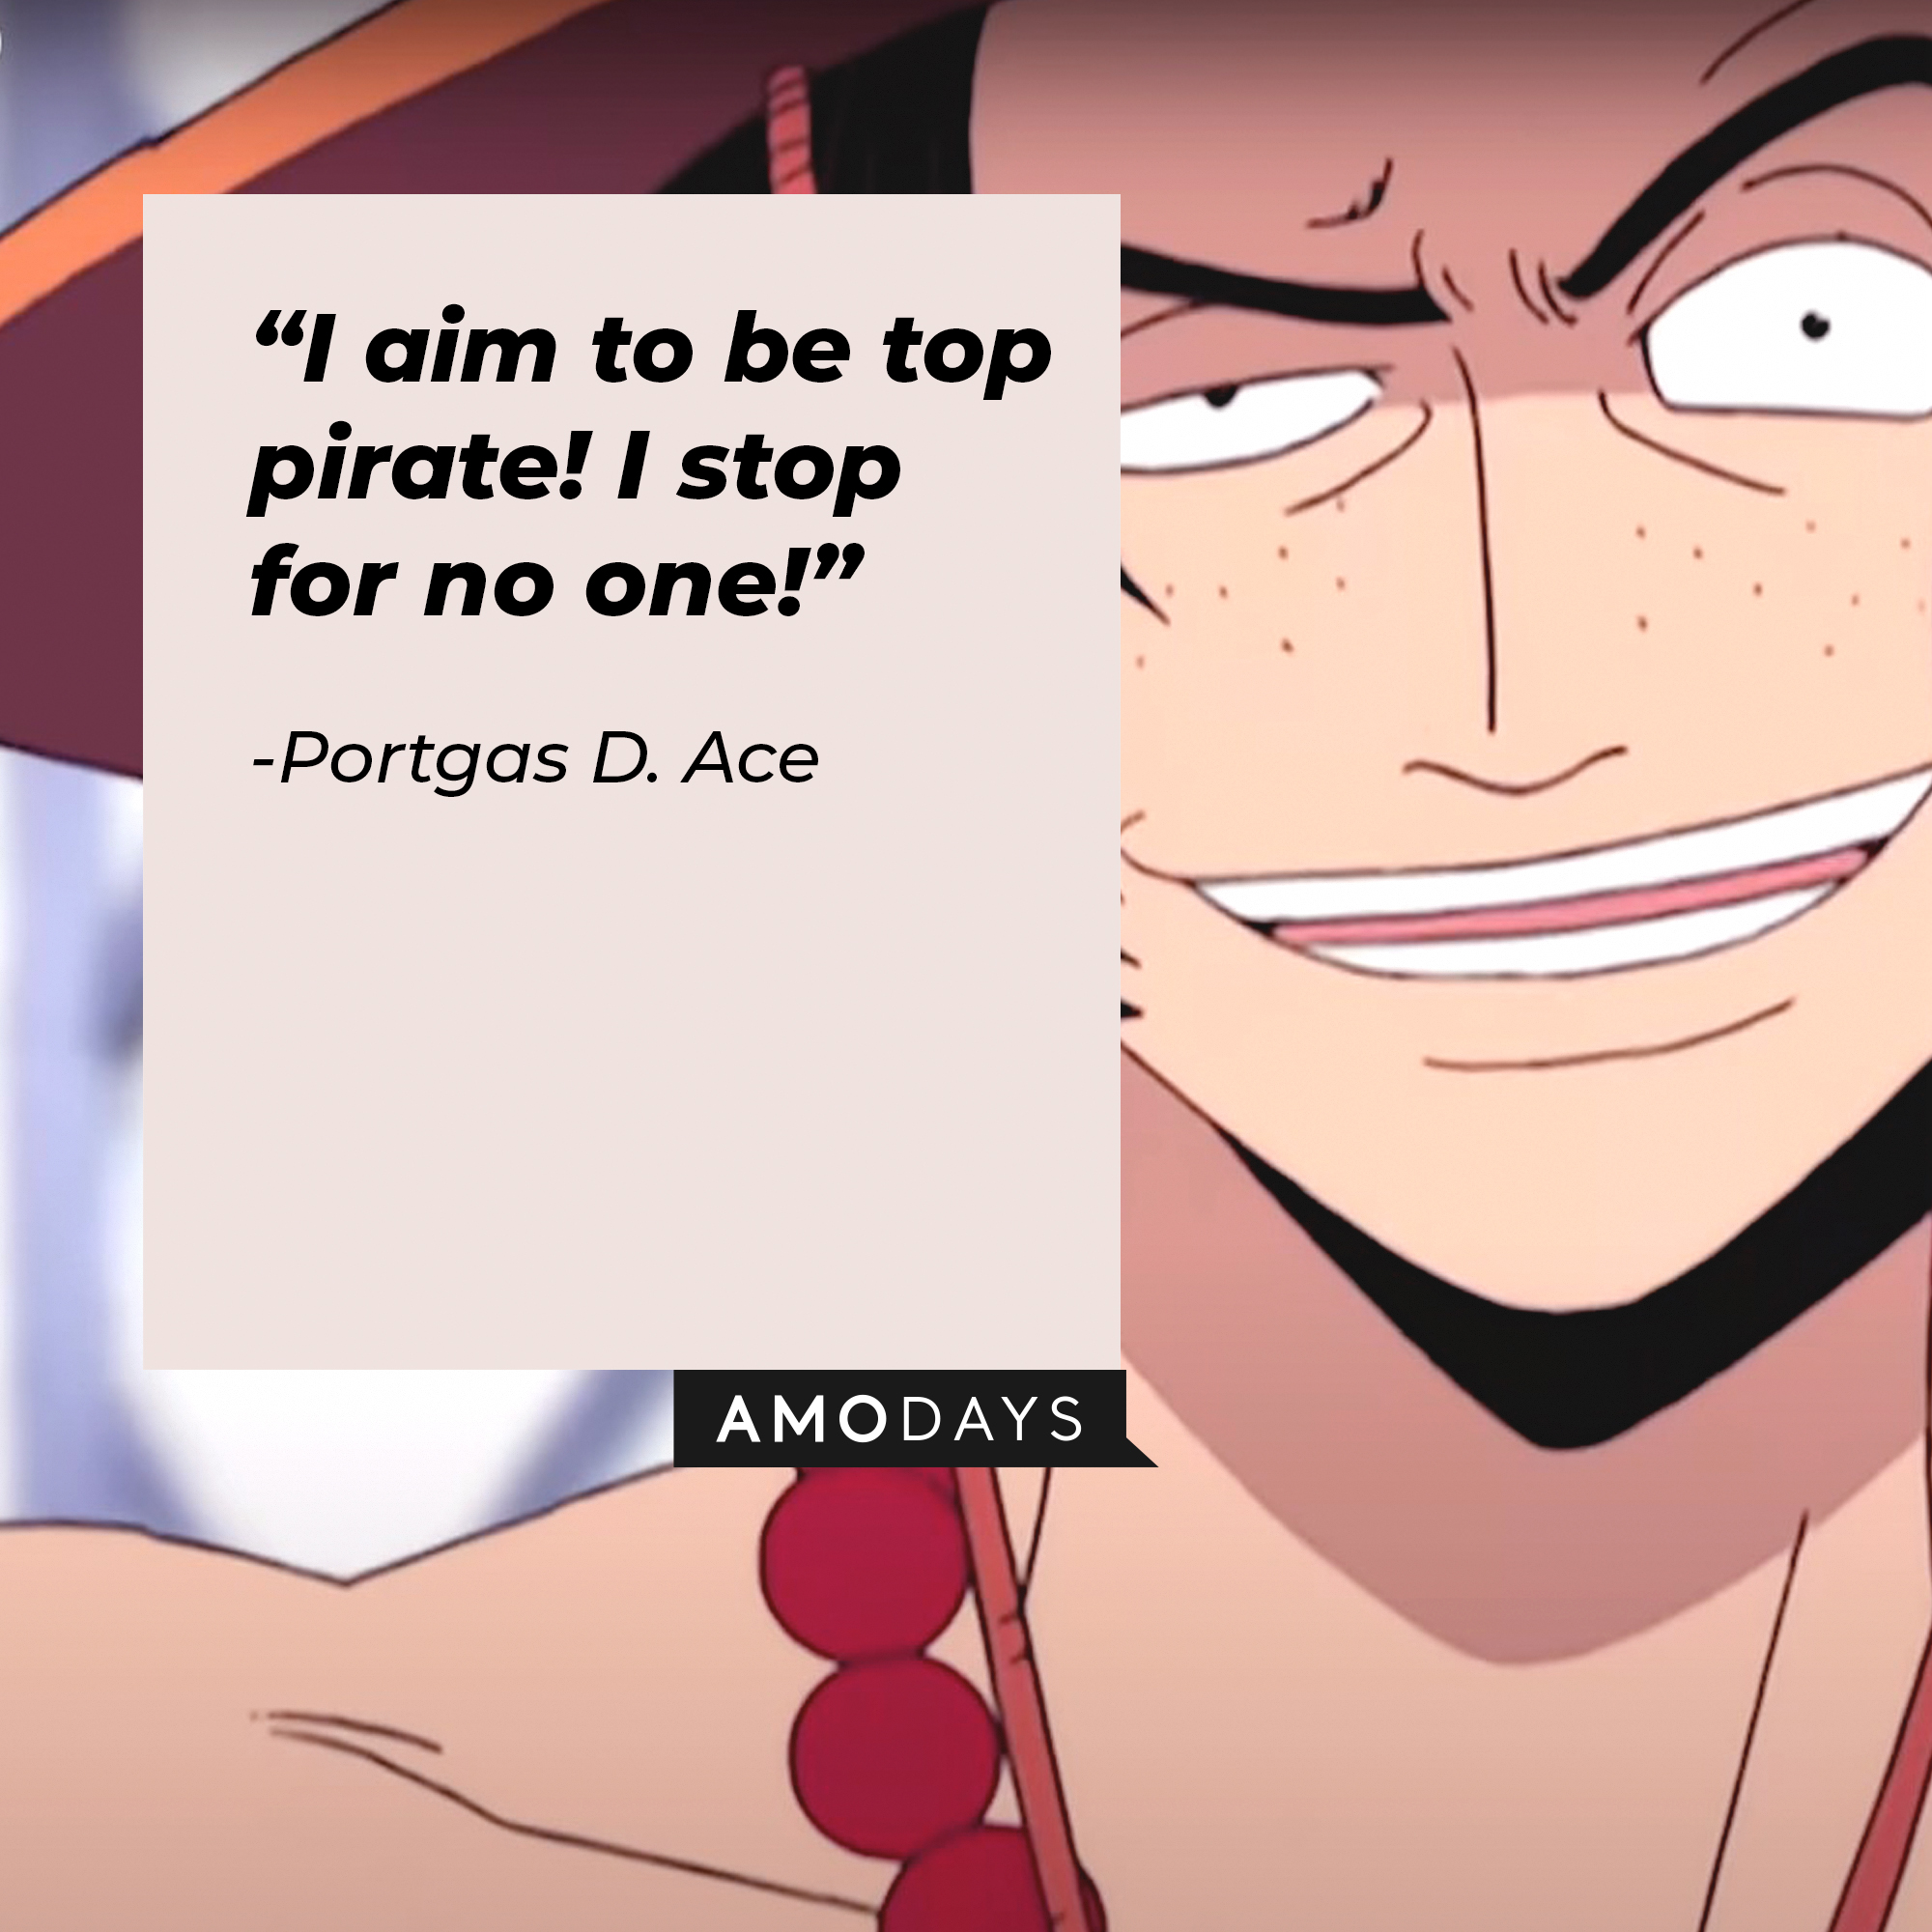 Portgas D. Ace’s quote: “I aim to be top pirate! I stop for no one!” | Source: facebook.com/onepieceofficial